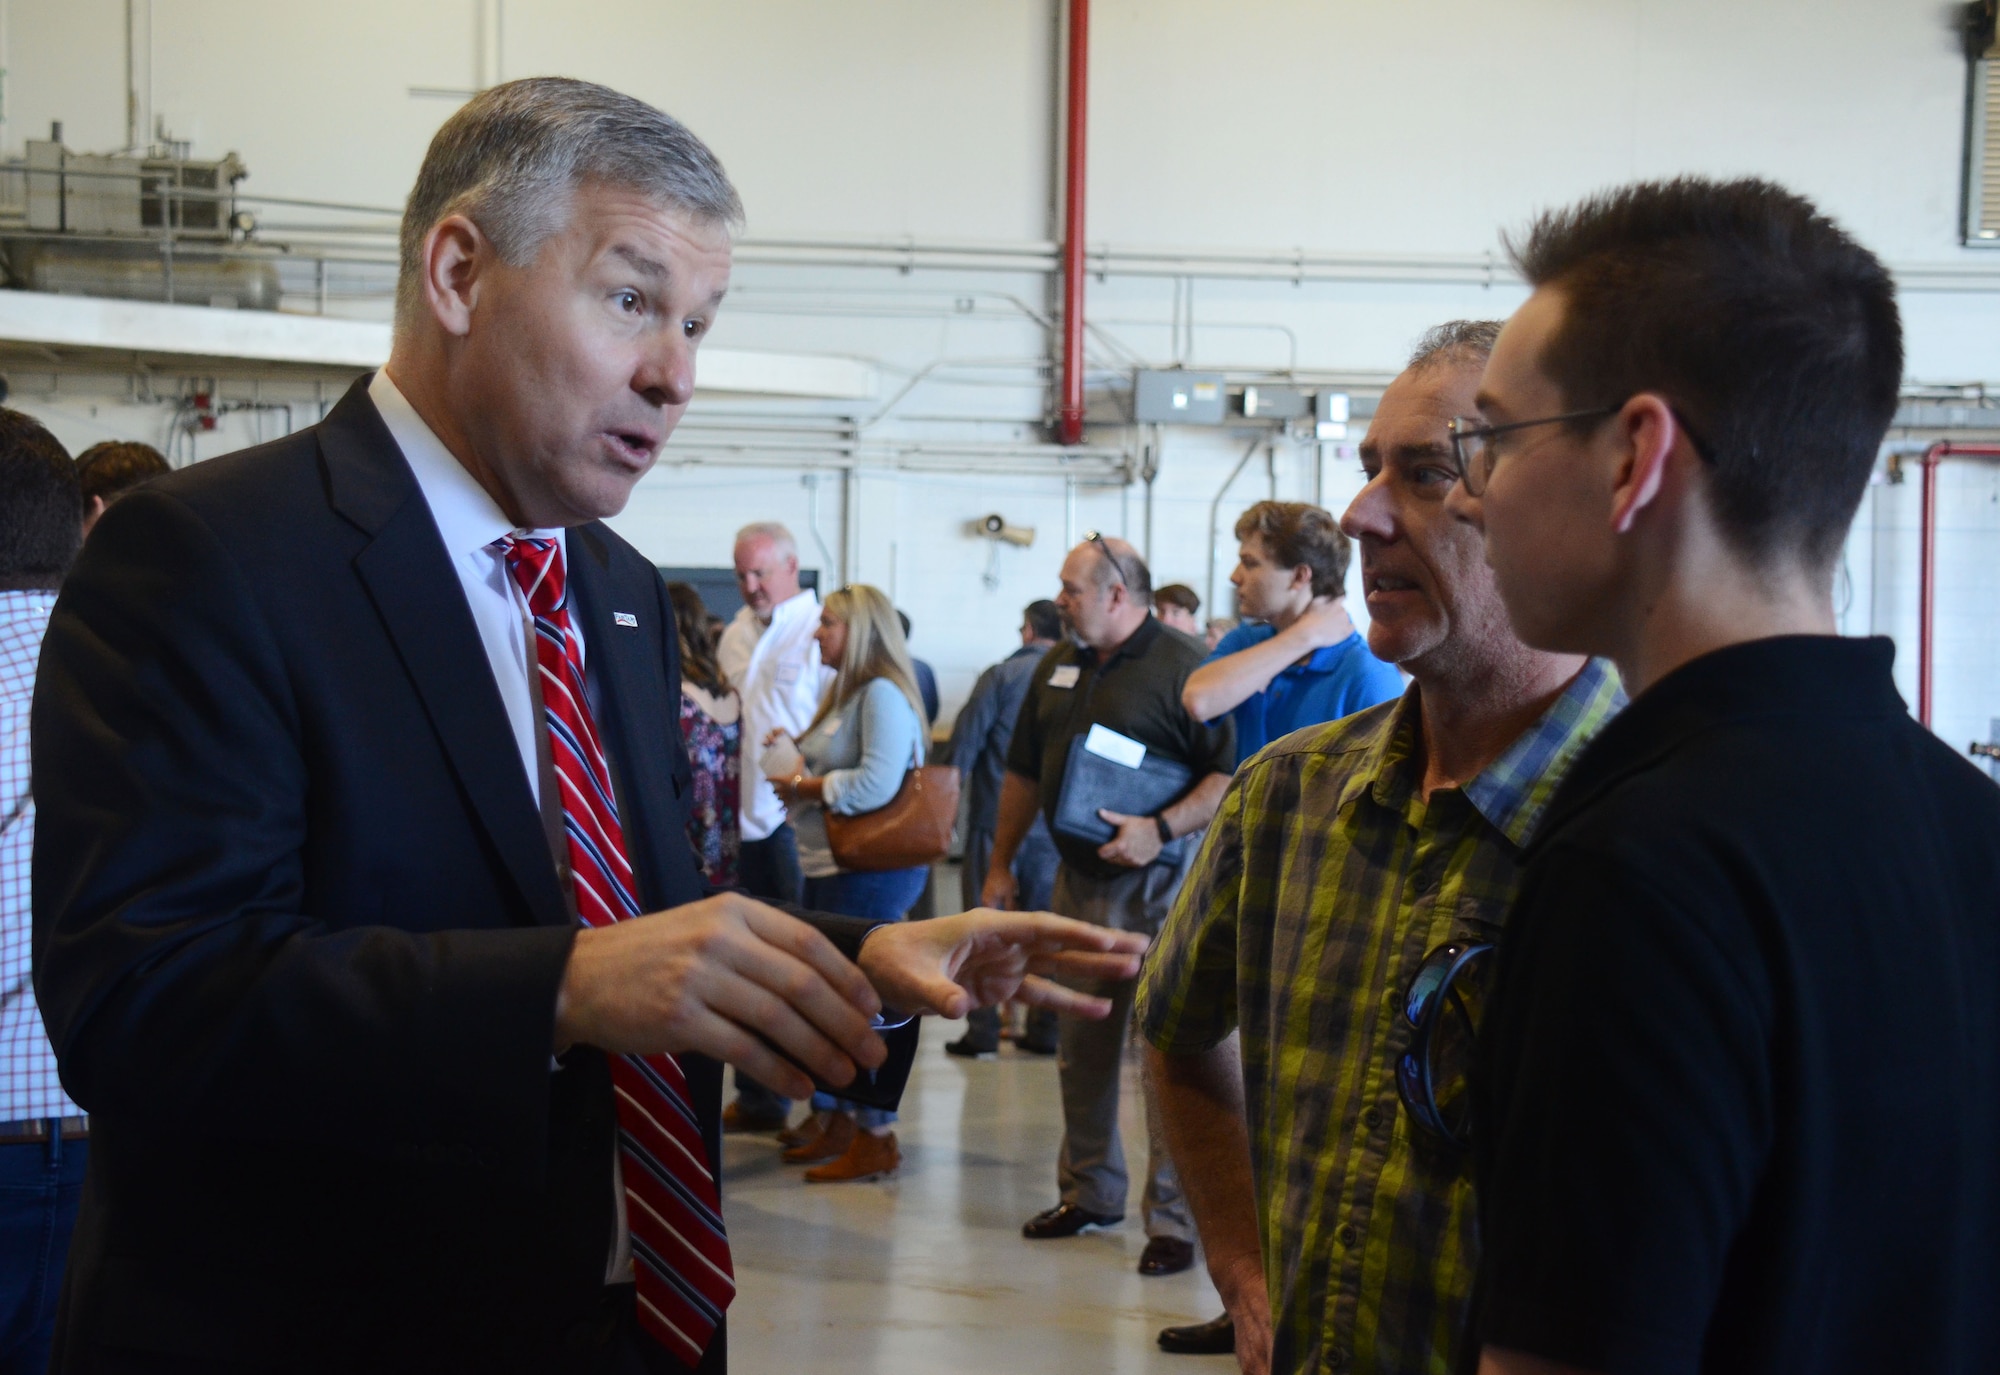 Congressman Rob Woodall talks with a student at this year's Academy Day, held at Dobbins Air Reserve Base, Ga. April 28, 2018. Many attendees got the chance to meet directly with congressional members to learn more about the process for applying to U.S. military academies. (U.S. Air Force photo/Don Peek)